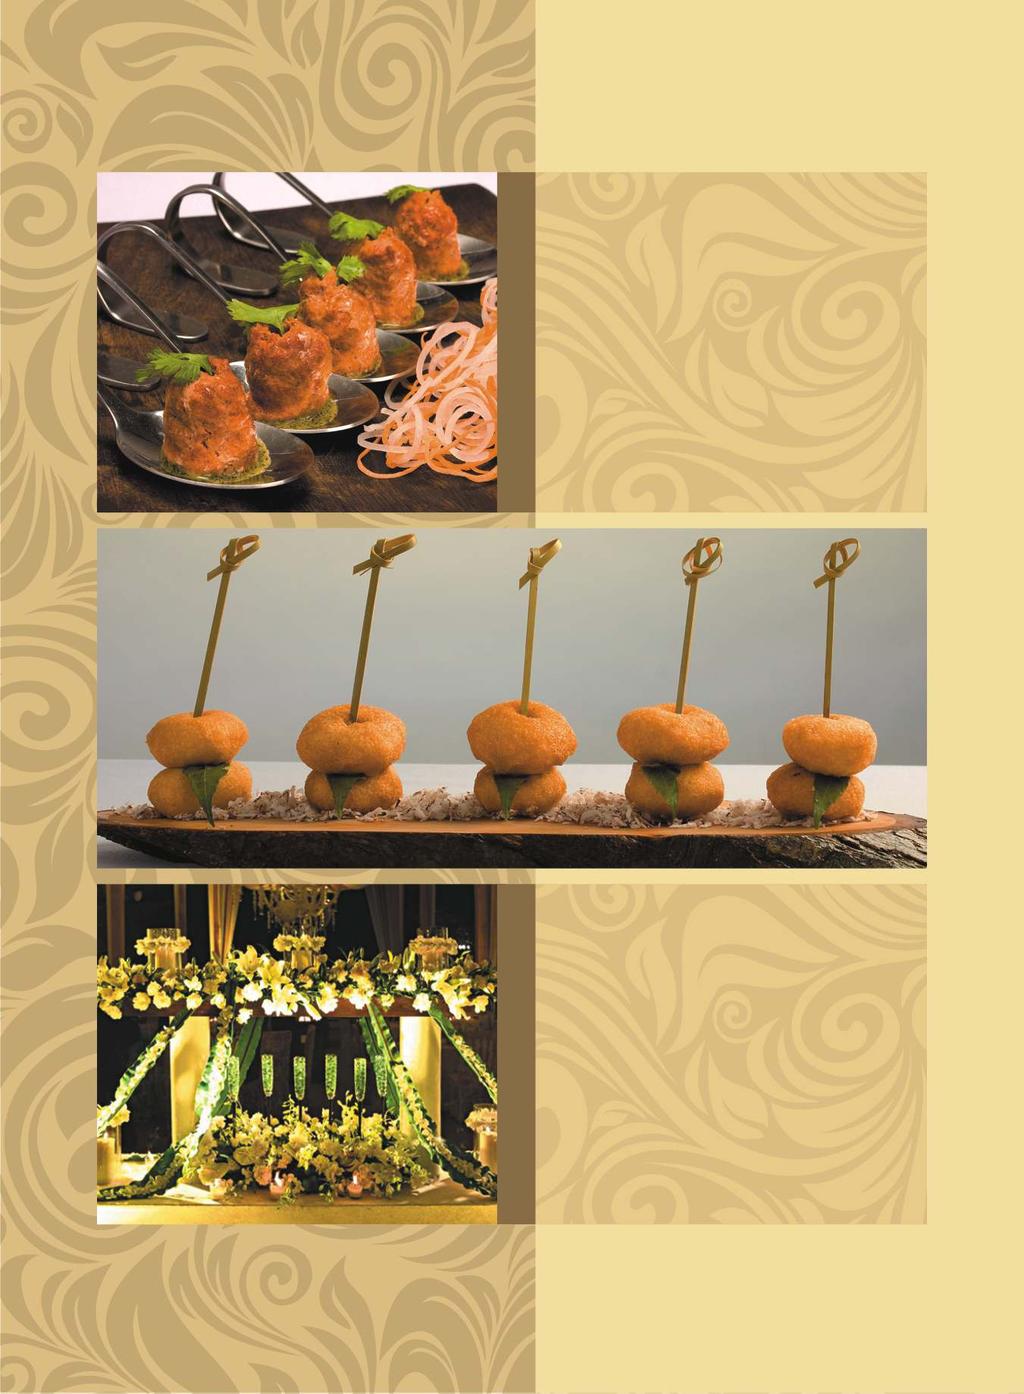 CUSTOMISED MENUS We rely on the expertise of our chefs to bring you the finest Indian and International cuisine from the kitchens of our unique fine dining restaurants including Chor Bizarre,